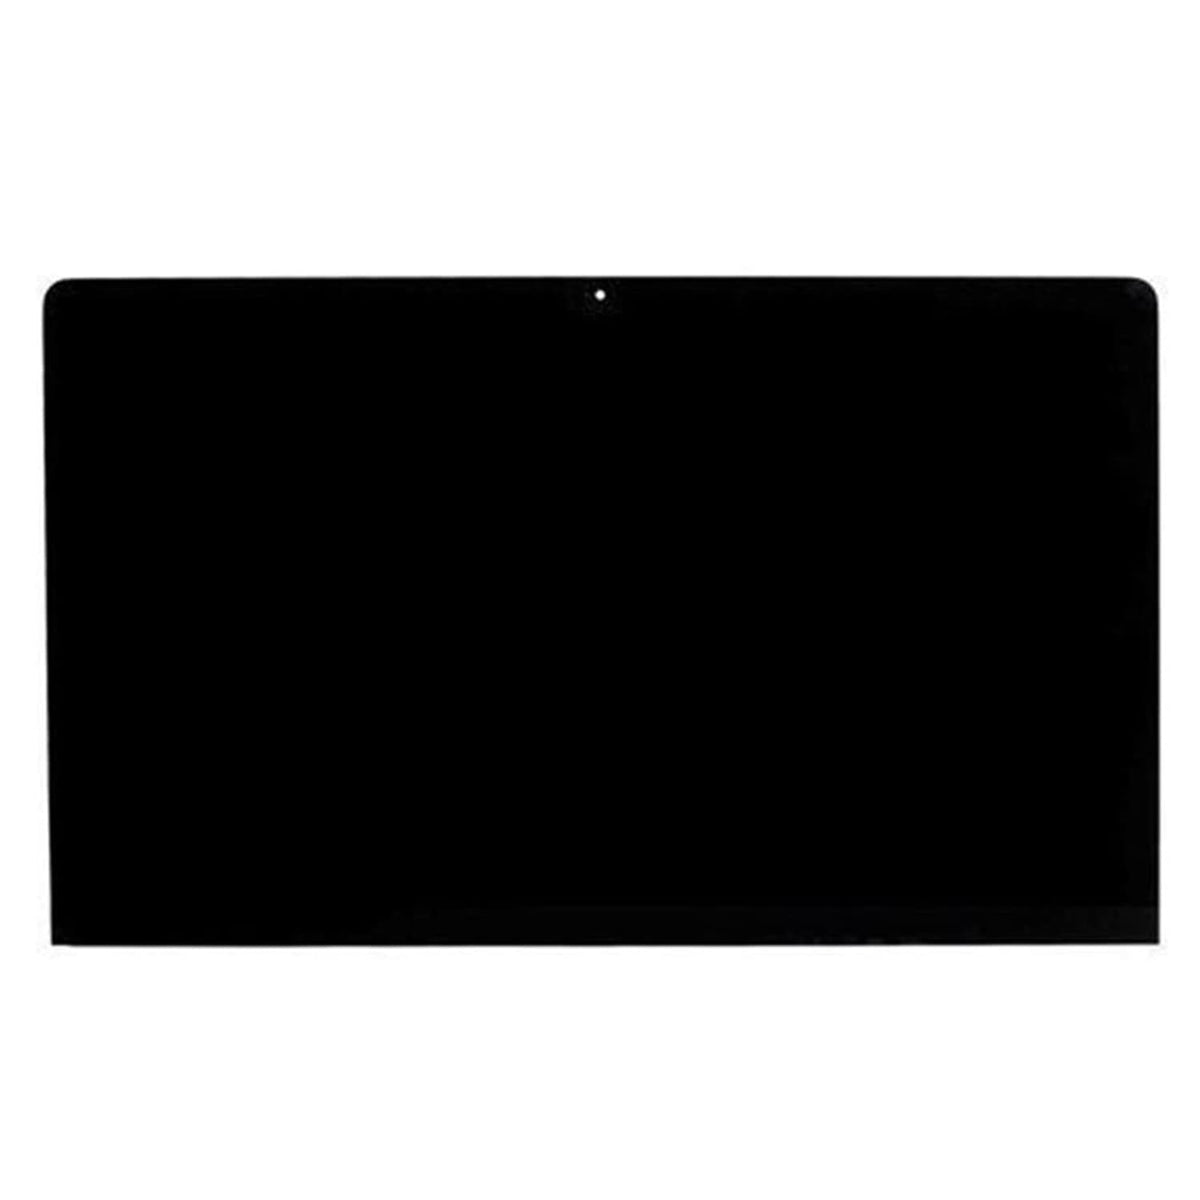 RETINA 4K LCD DISPLAY ASSEMBLY FOR IMAC 21.5" A1418/A2116 (MID 2017, EARLY 2019) 661-07322, 661-12564